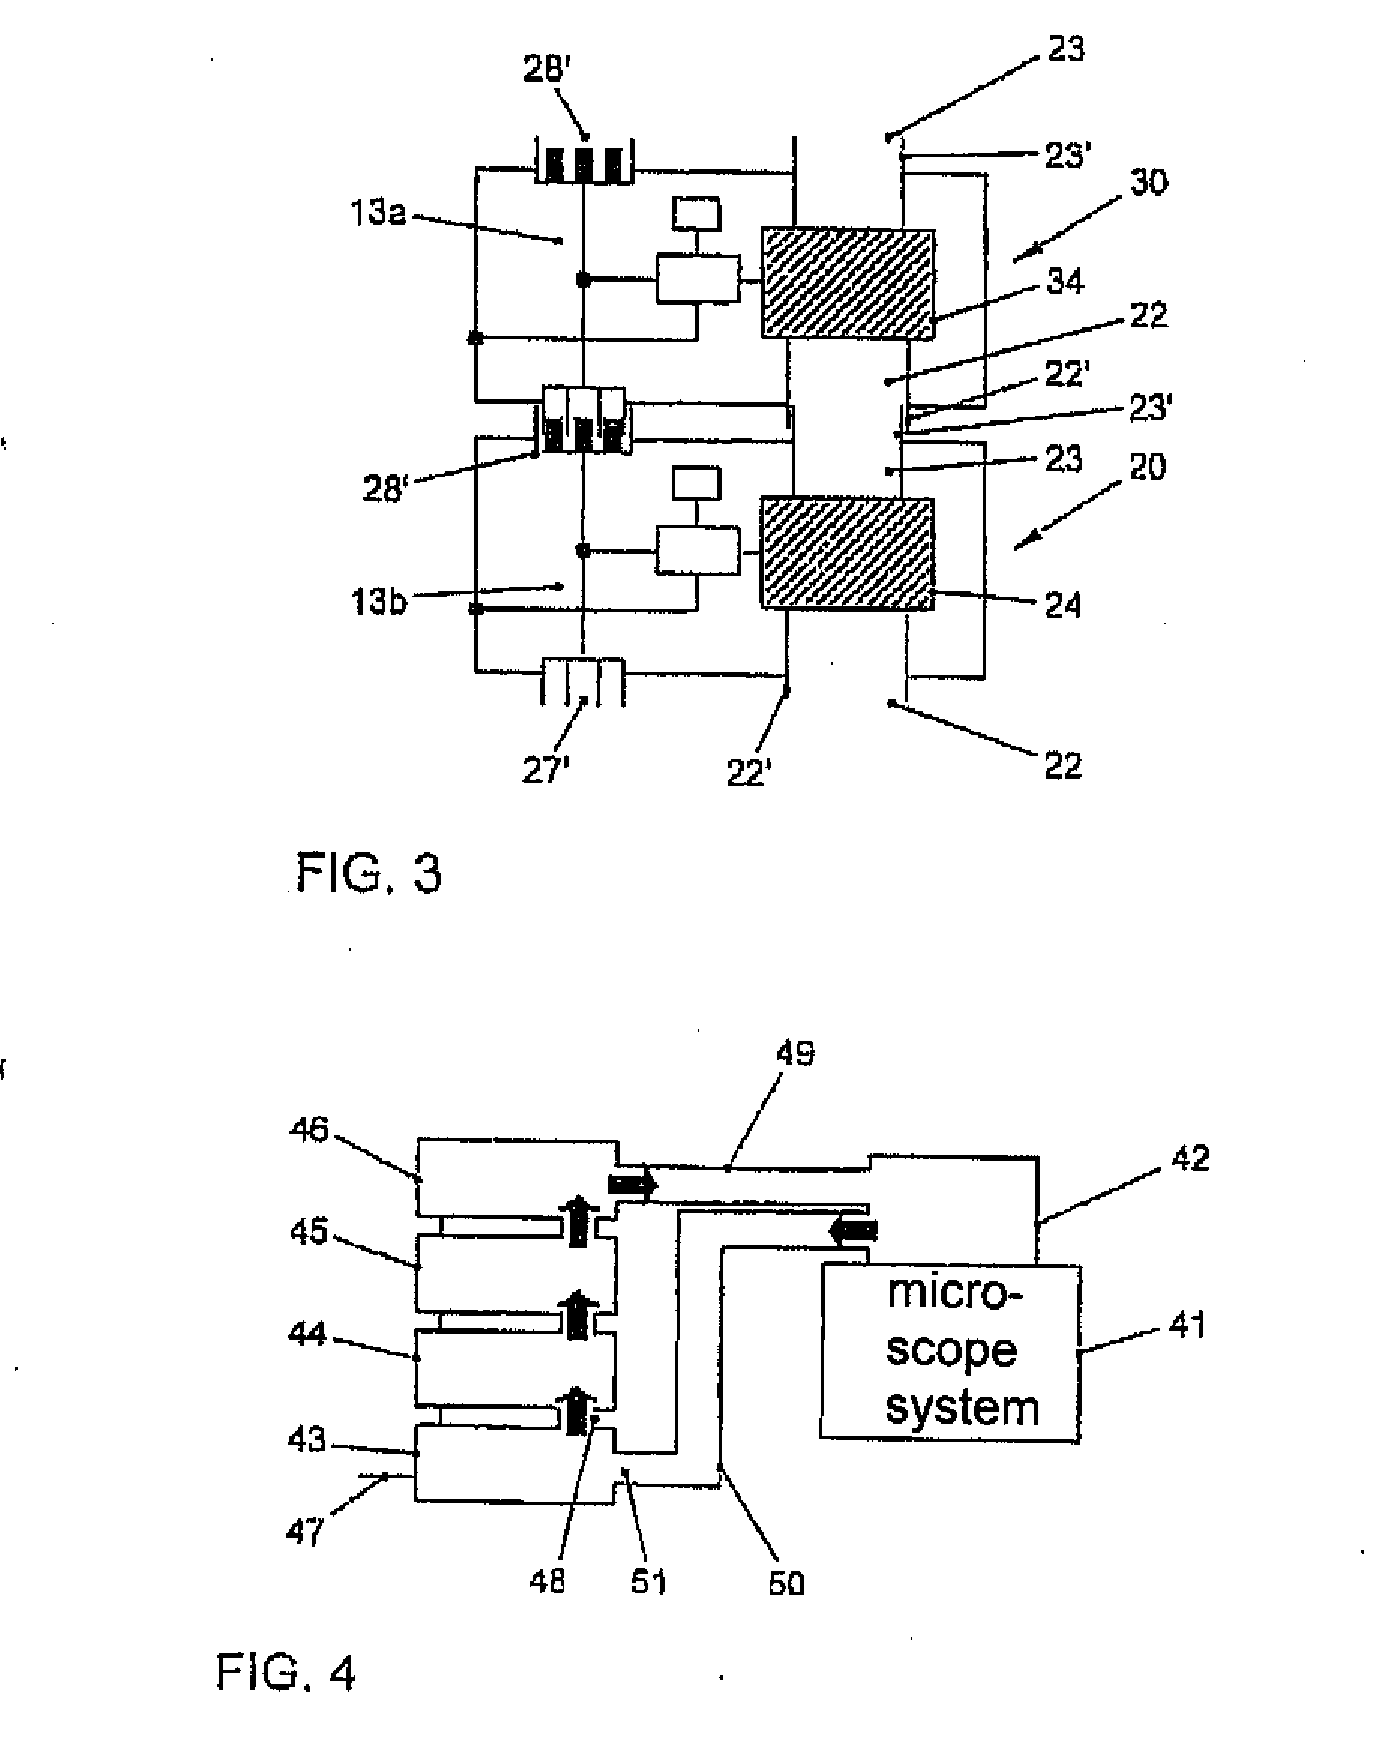 Control System for Influencing Test-environment Parameters, Method for Controlling a Microscope System and Computer Control Program for Same